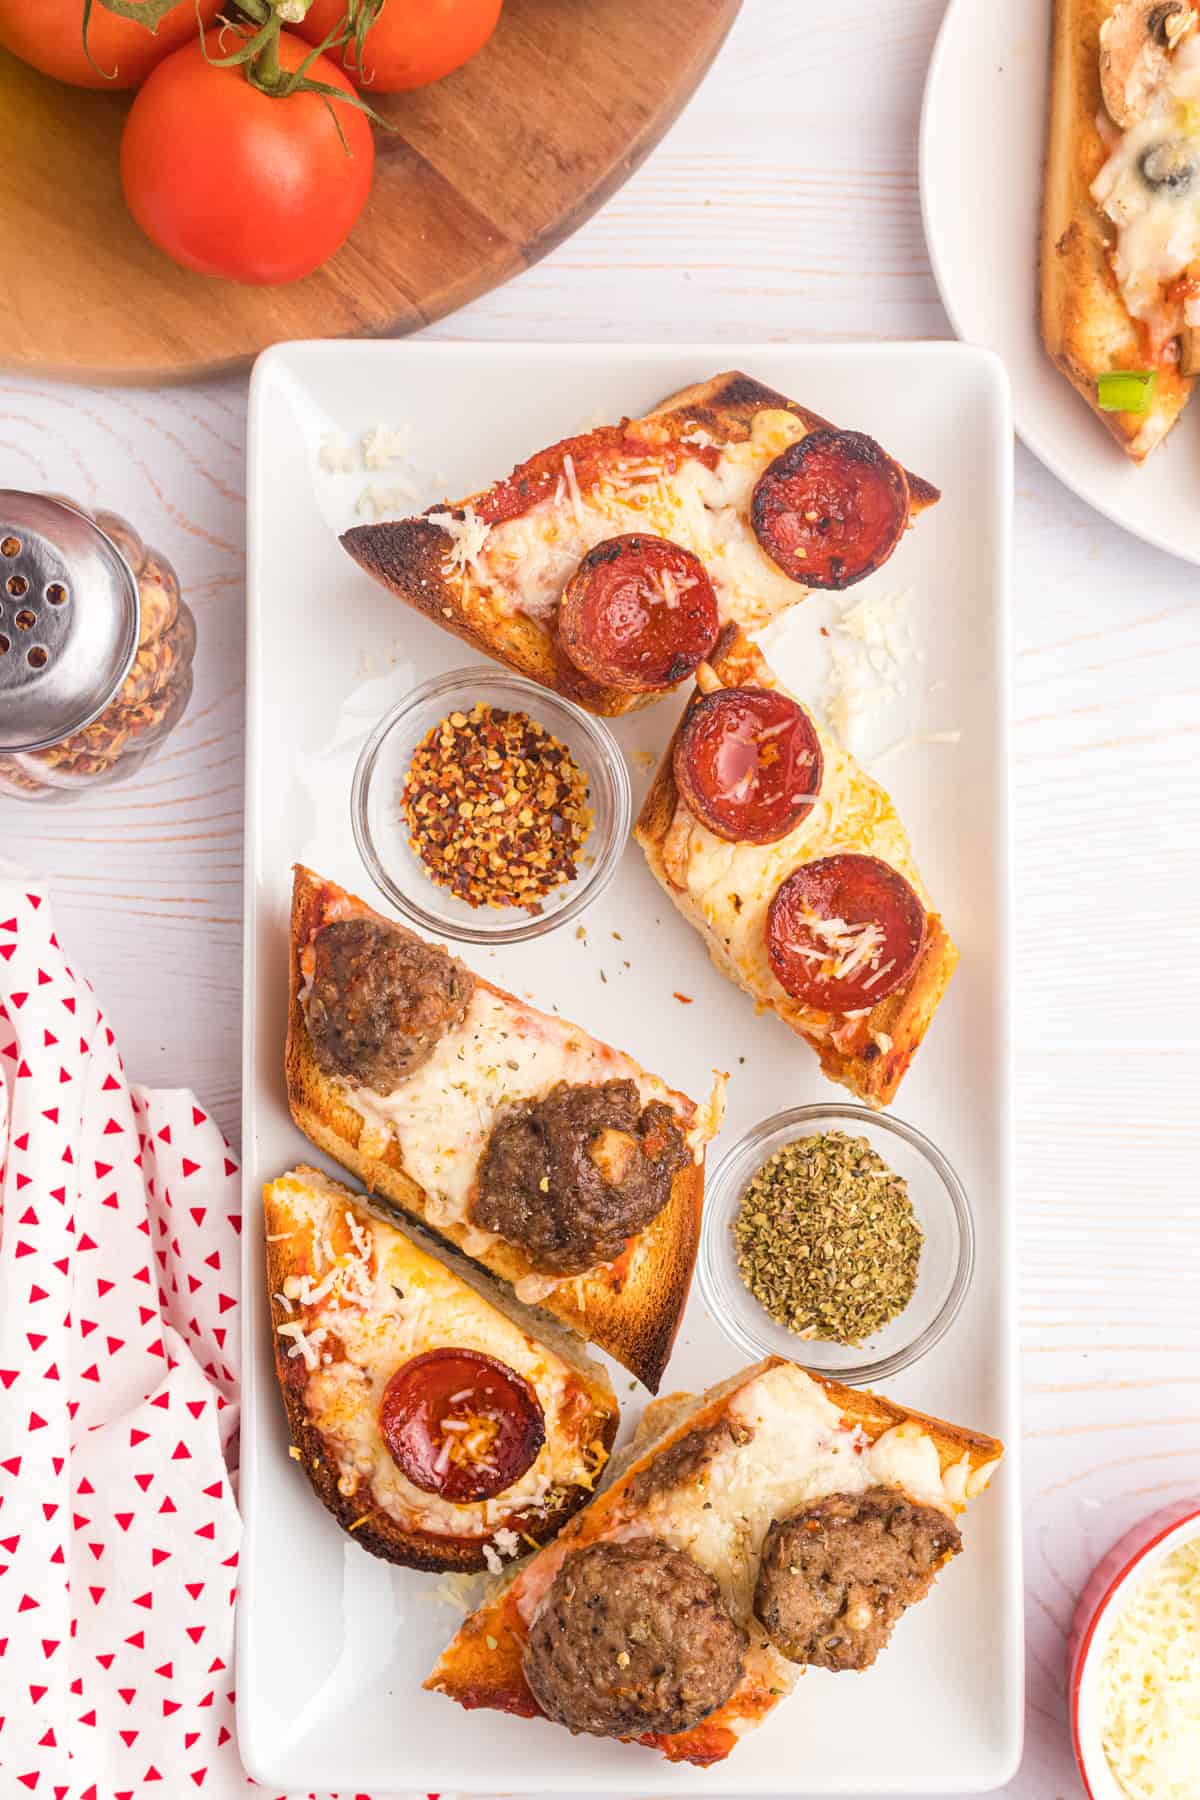 Several pieces of french bread pizza are placed on a white serving platter.